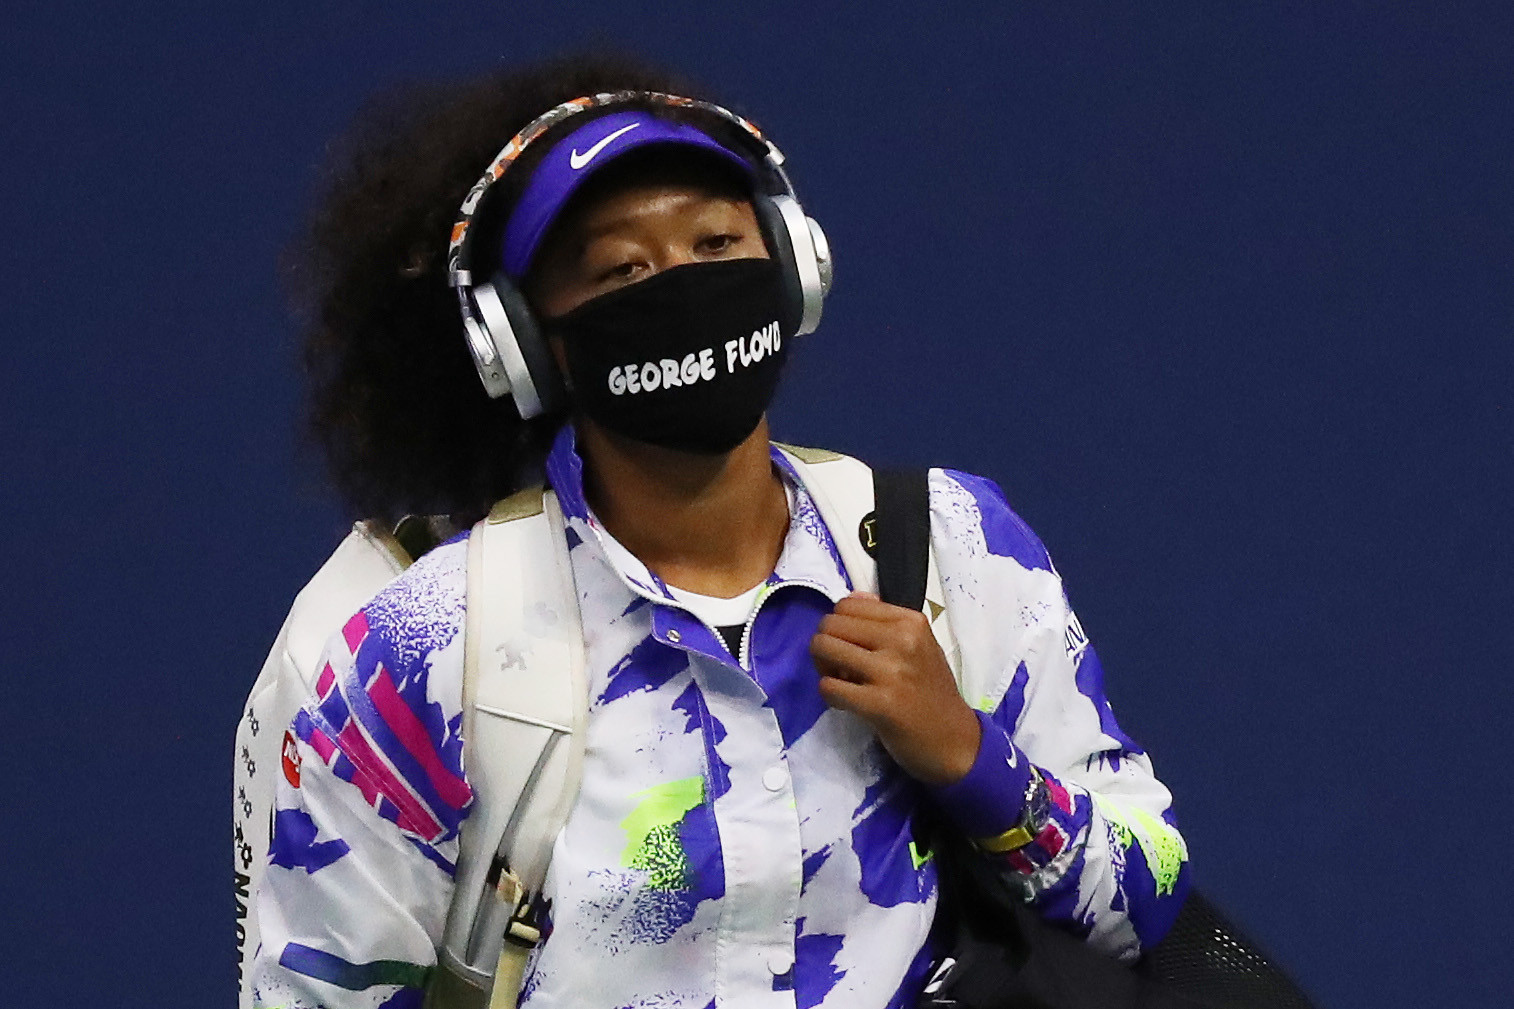 Naomi Osaka is among the high-profile athletes using their platform to advocate for social justice   ©Getty Images